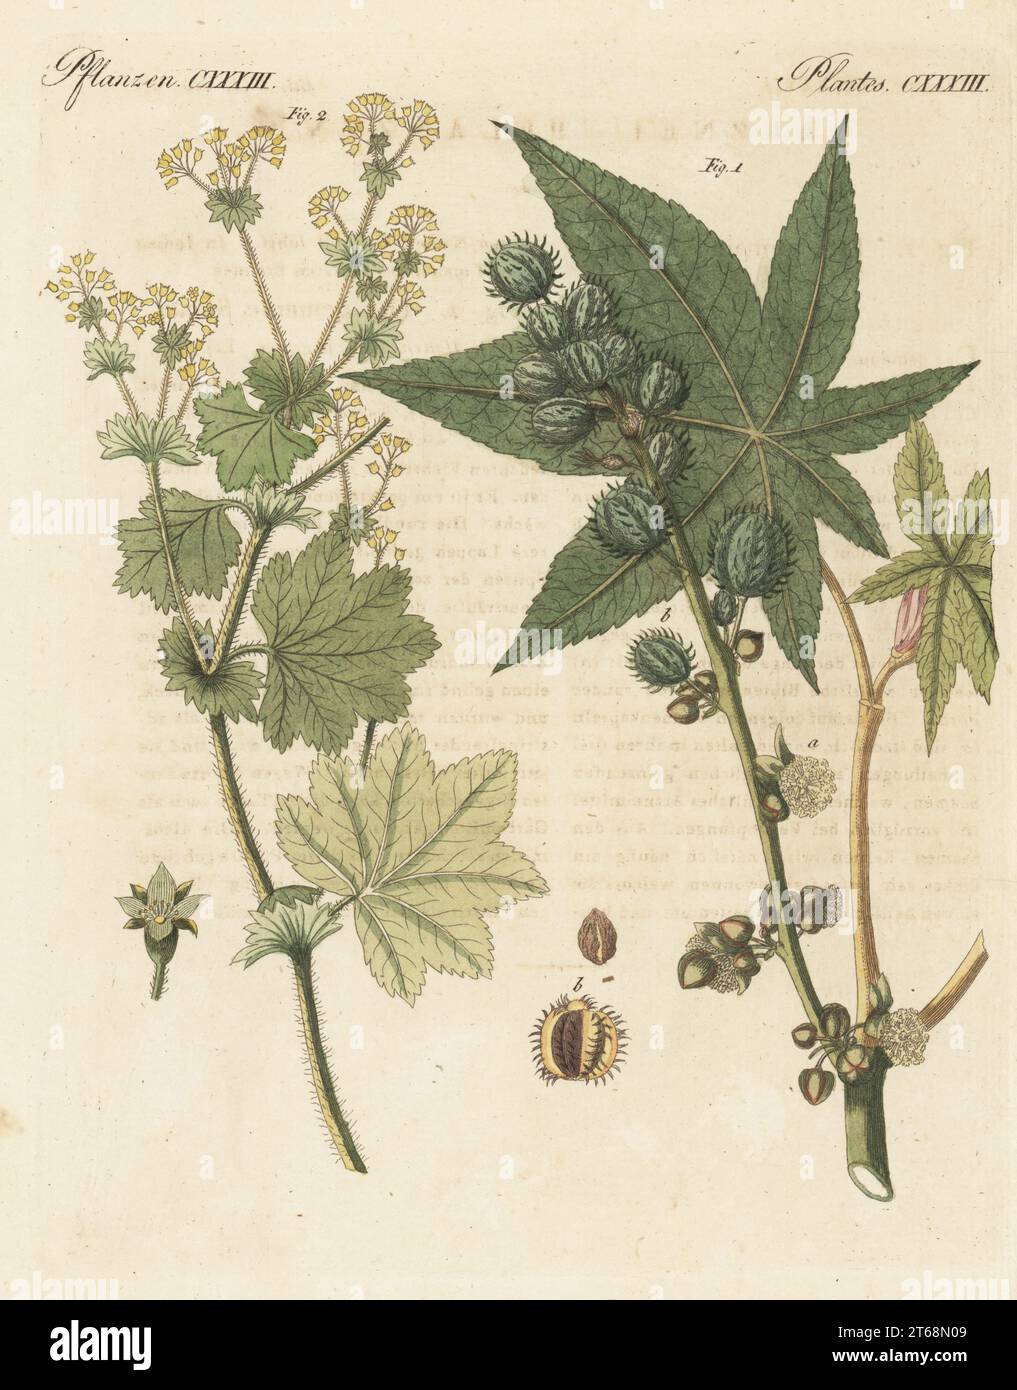 Castor oil plant, Ricinus communis 1 and lady's mantle, Alchemilla vulgaris 2. Wunderbaum, Ricin, Sinau, l'Alchemille. The botanicals were drawn by Henriette and Conrad Westermayr, F. Götz and C. Ermer. Handcoloured copperplate engraving from Carl Bertuch's Bilderbuch fur Kinder (Picture Book for Children), Weimar, 1810. A 12-volume encyclopedia for children illustrated with almost 1,200 engraved plates on natural history, science, costume, mythology, etc., published from 1790-1830. Stock Photo